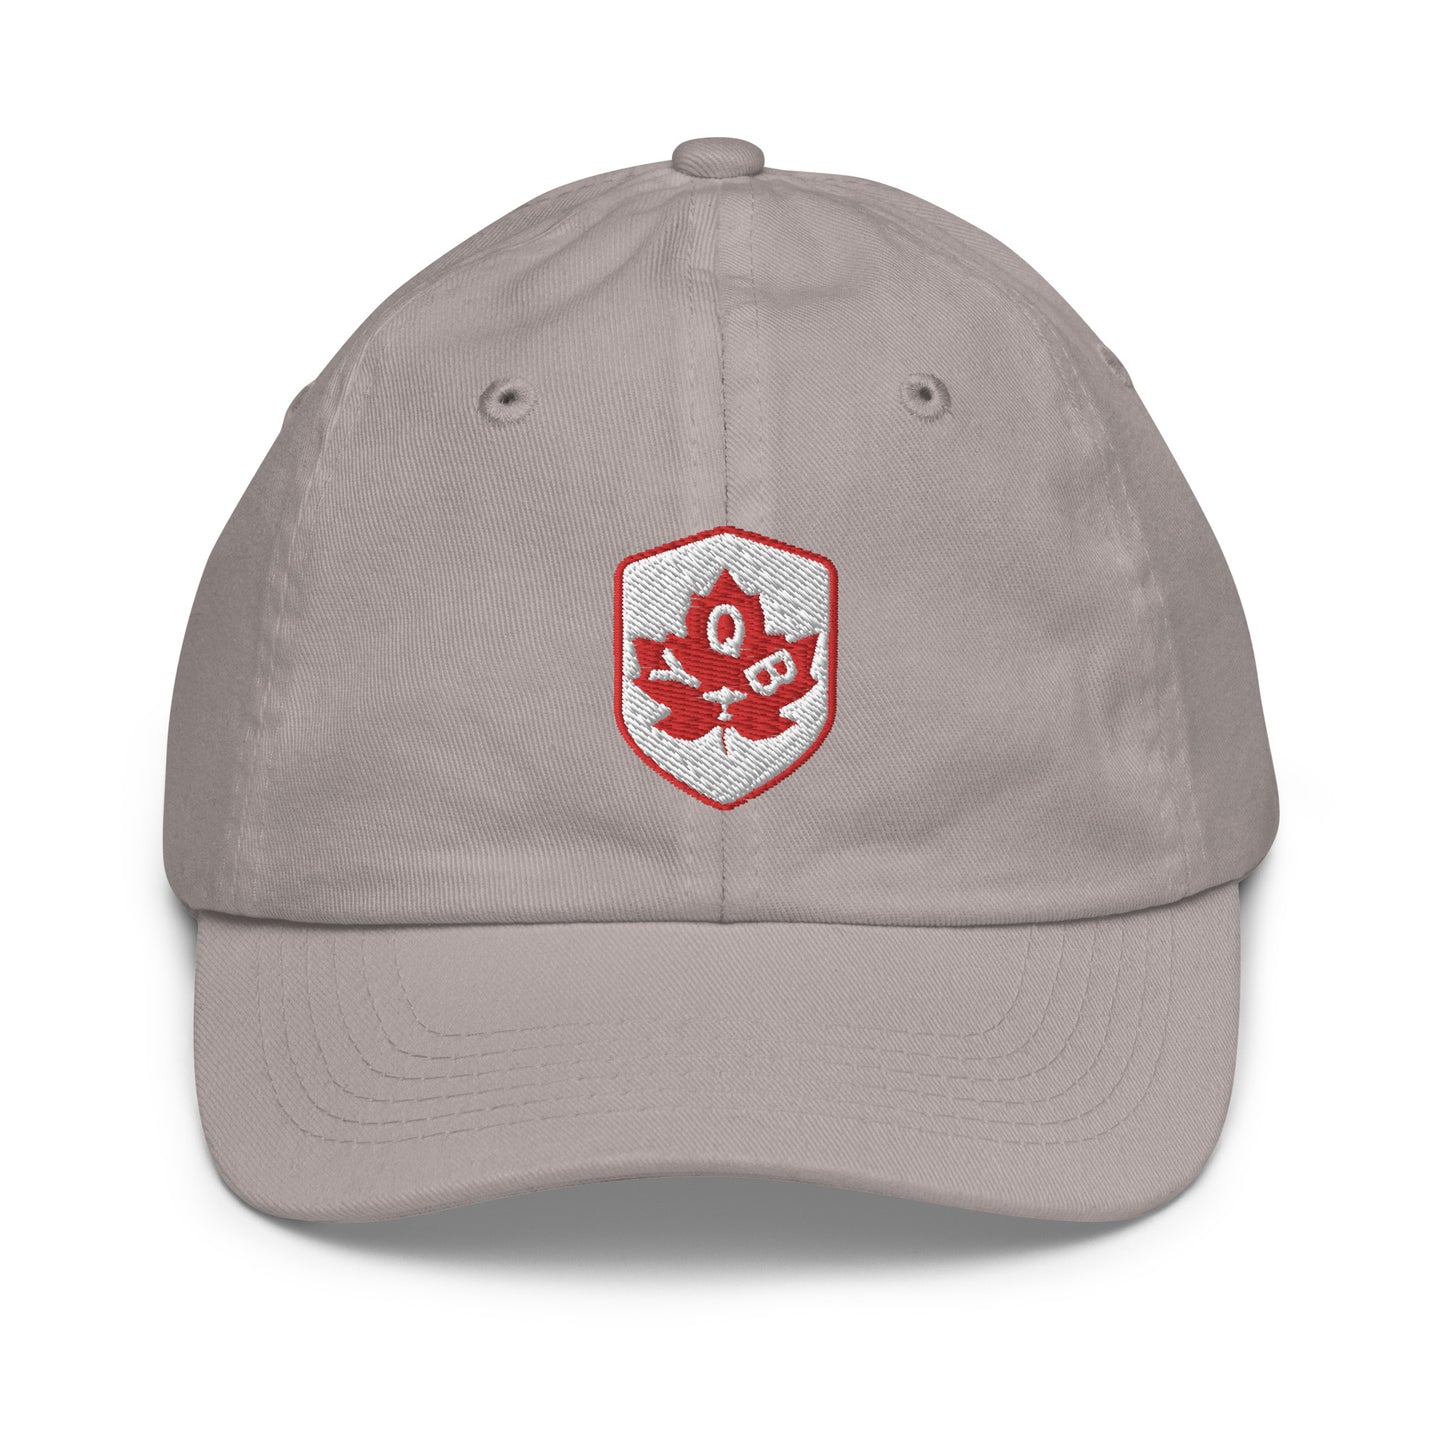 Maple Leaf Kid's Cap - Red/White • YQB Quebec City • YHM Designs - Image 22